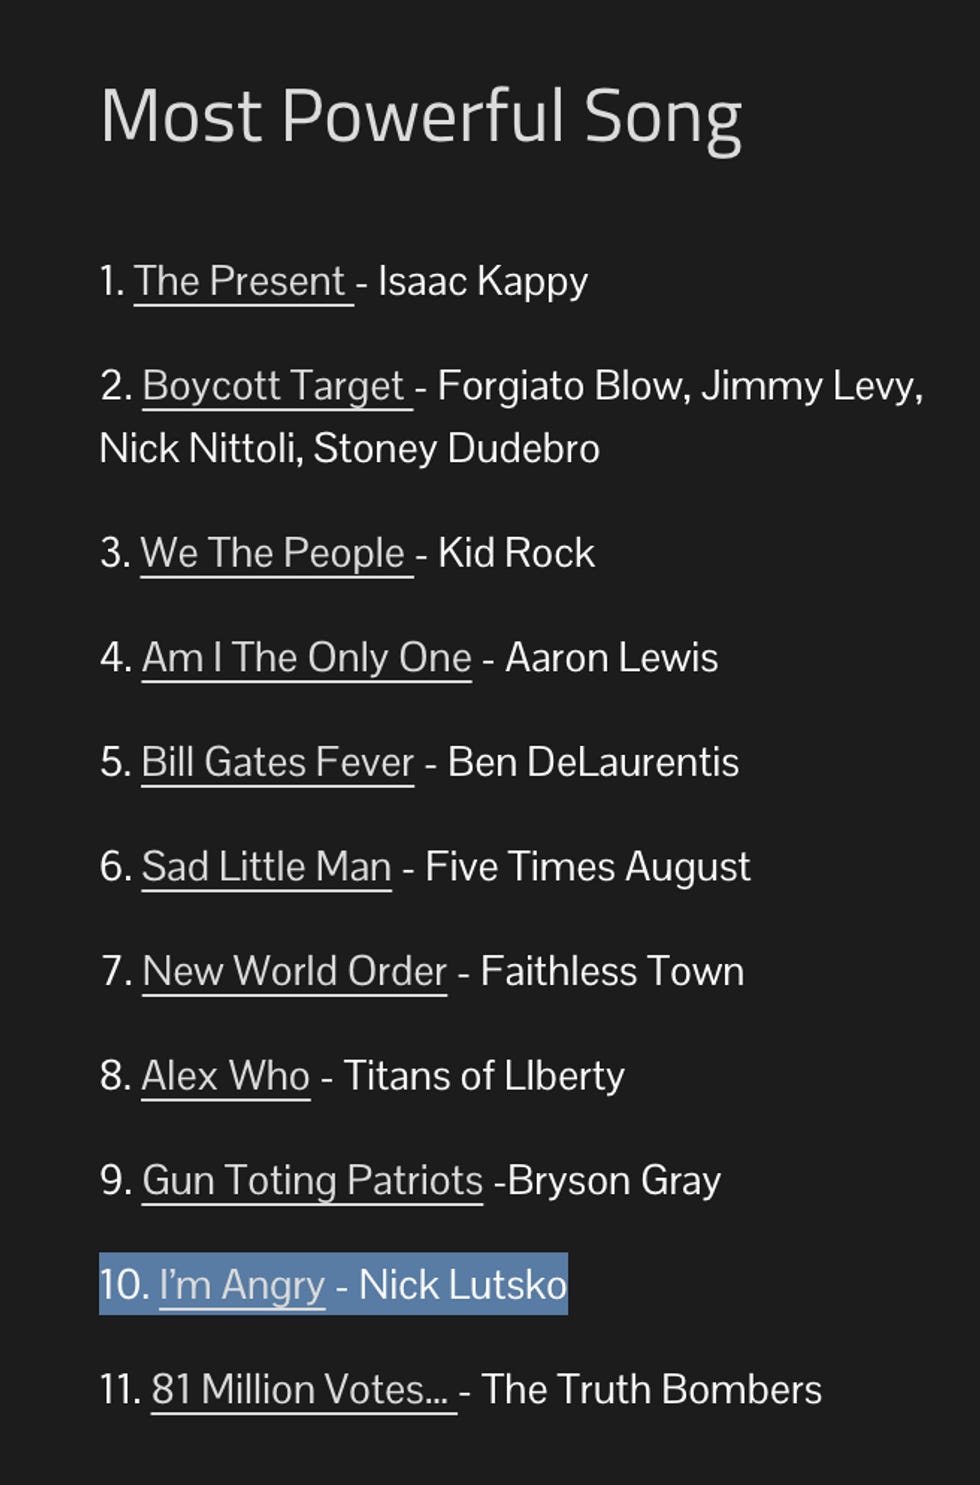 Most Powerful Song 1. The Present - Isaac Kappy  2. Boycott Target - Forgiato Blow, Jimmy Levy, Nick Nittoli, Stoney Dudebro  3. We The People - Kid Rock  4. Am I The Only One - Aaron Lewis  5. Bill Gates Fever - Ben DeLaurentis  6. Sad Little Man - Five Times August  7. New World Order - Faithless Town  8. Alex Who - Titans of LIberty  9. Gun Toting Patriots -Bryson Gray  10. I\u2019m Angry - Nick Lutsko  11. 81 Million Votes\u2026 - The Truth Bombers